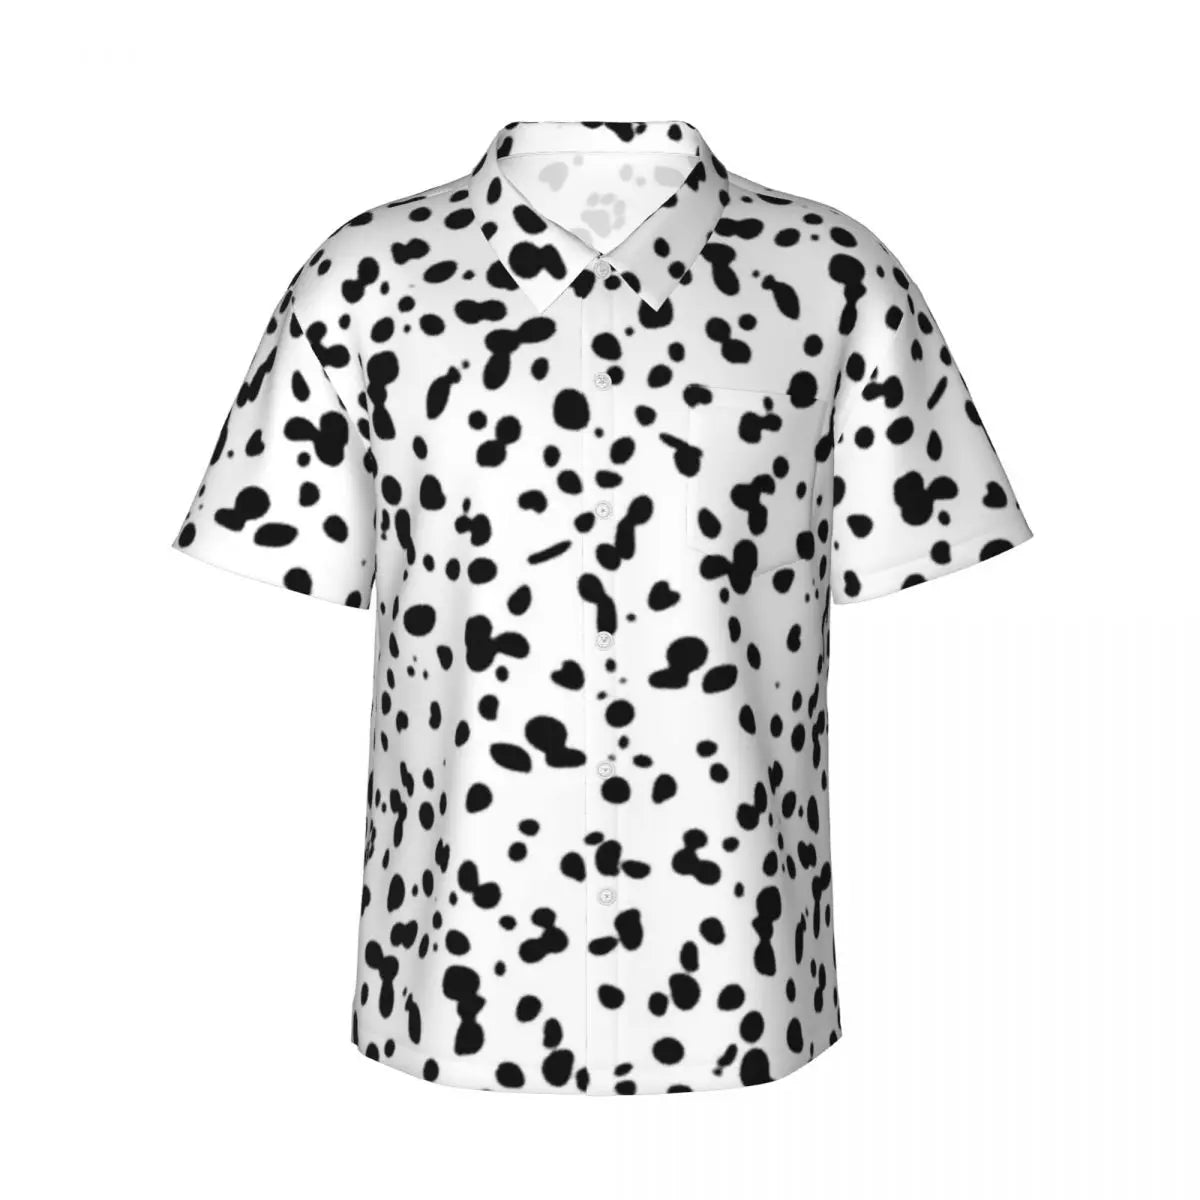 Black and Golden Dog Patterns Men's Beach Style Casual Short Sleeve Shirt